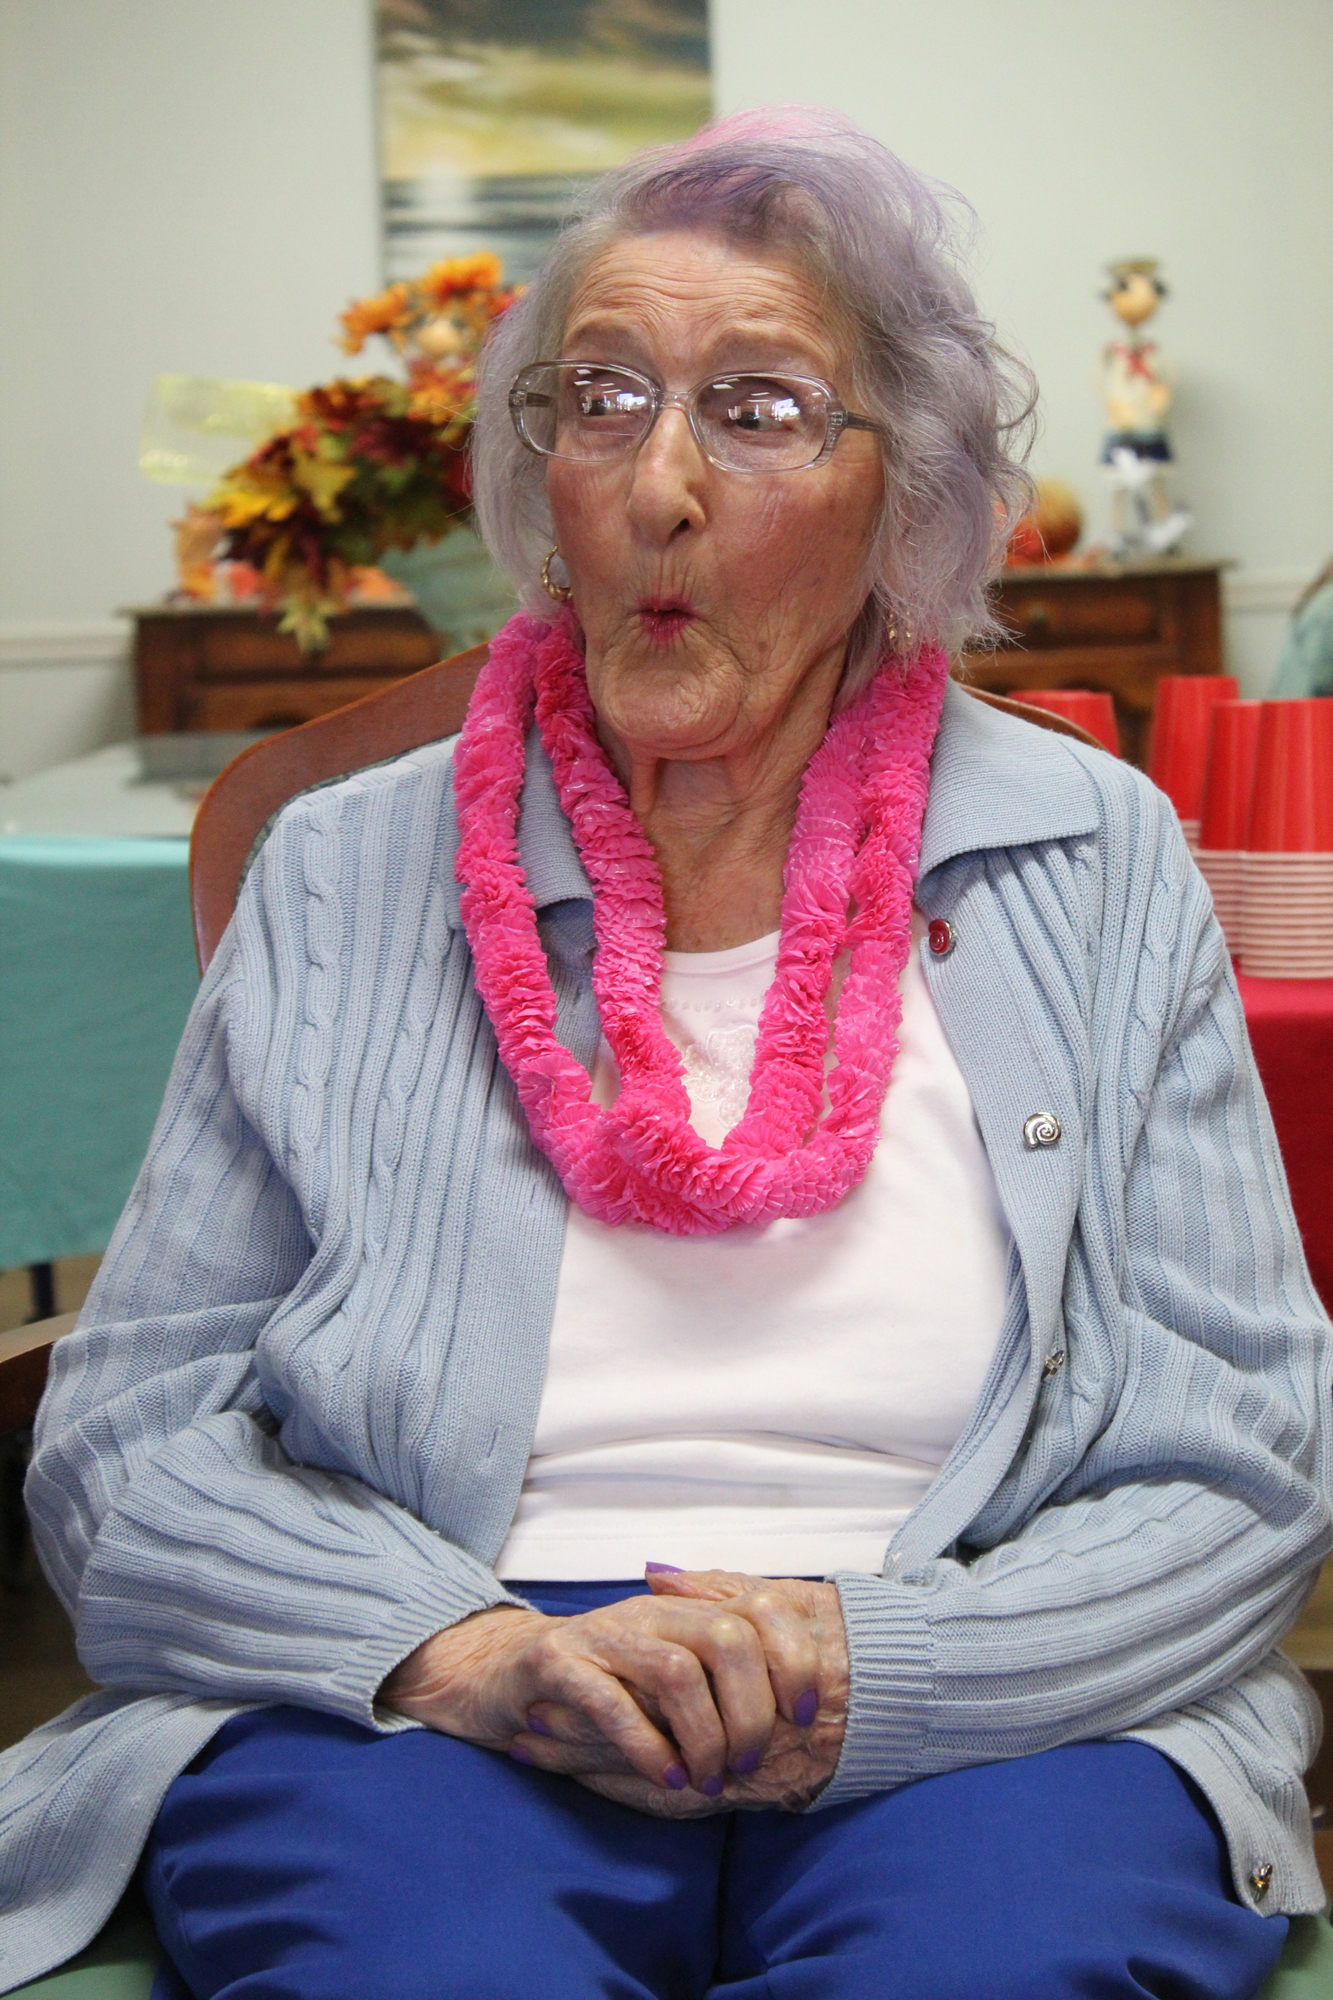 Erma Mohl makes a funny face during her 103rd birthday party on Monday, Oct. 30. Photo by Jarleene Almenas